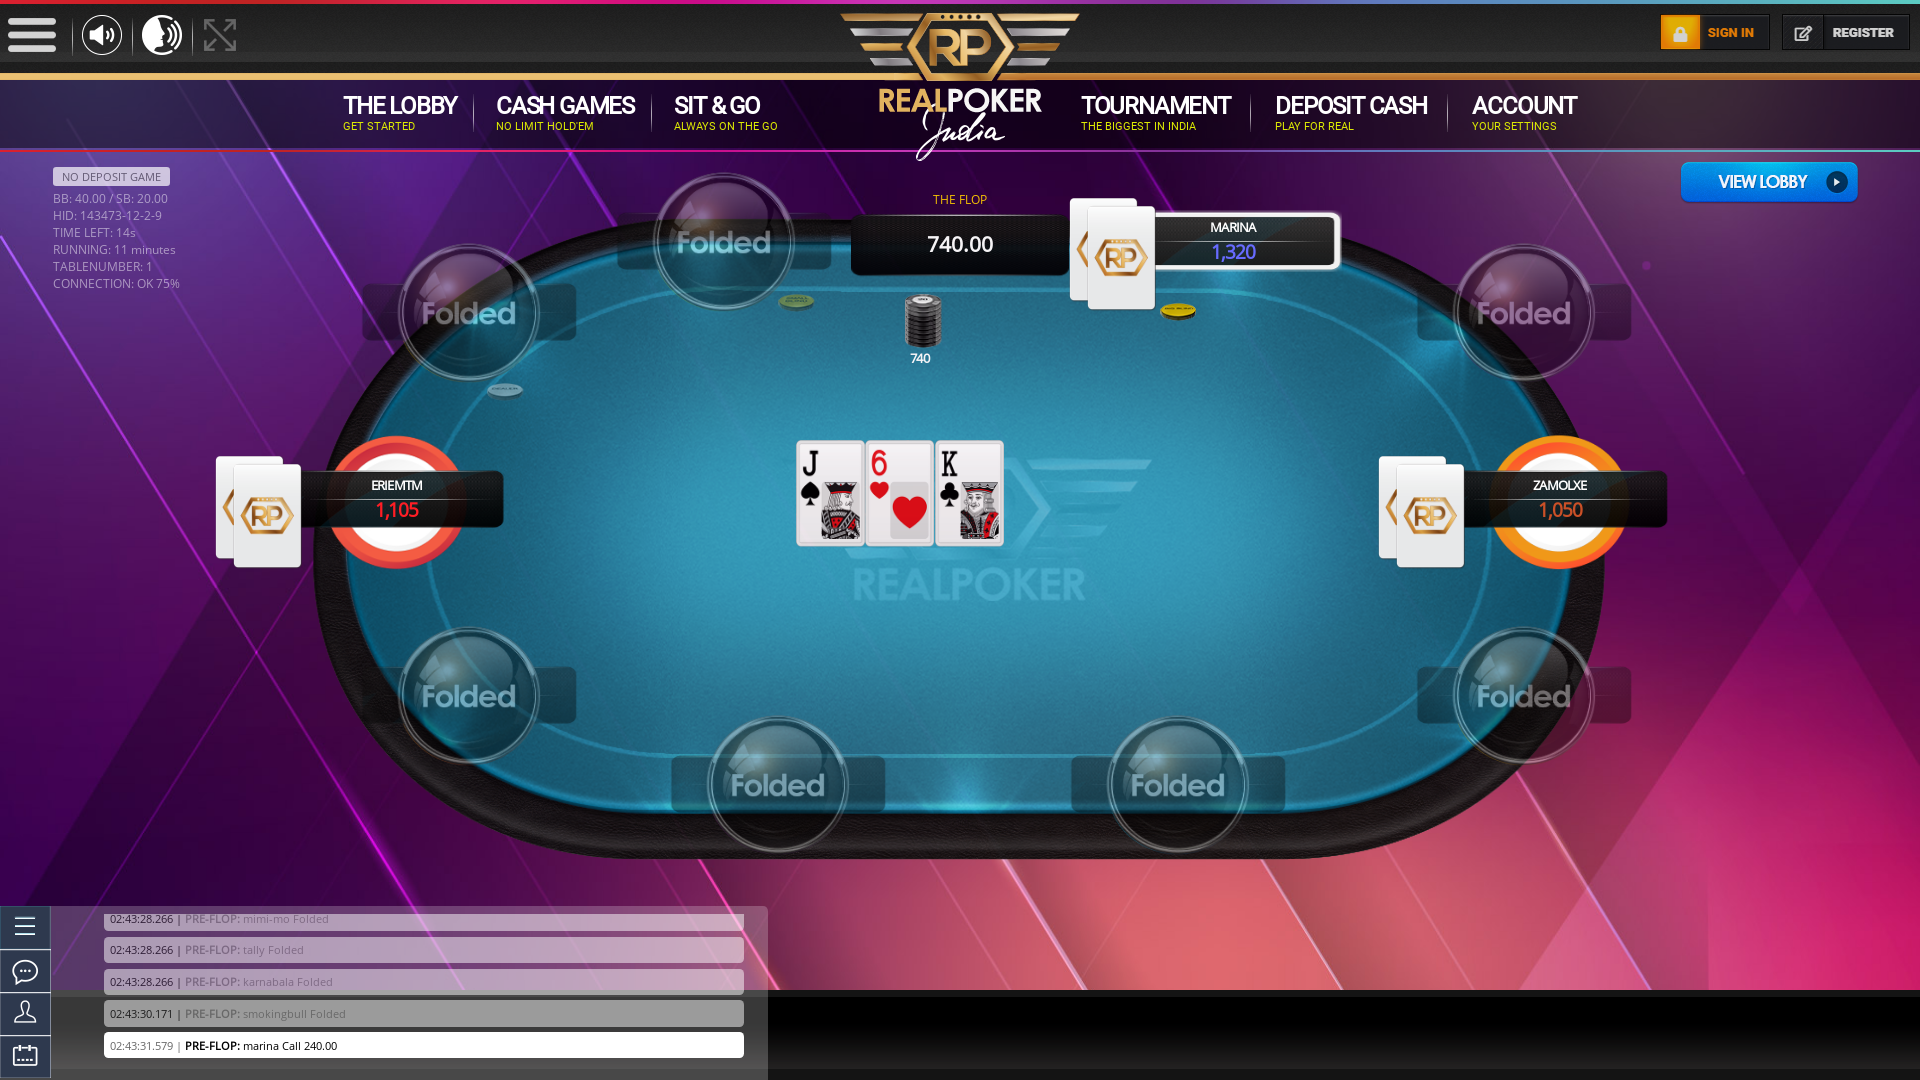 10 player poker in the 11th minute